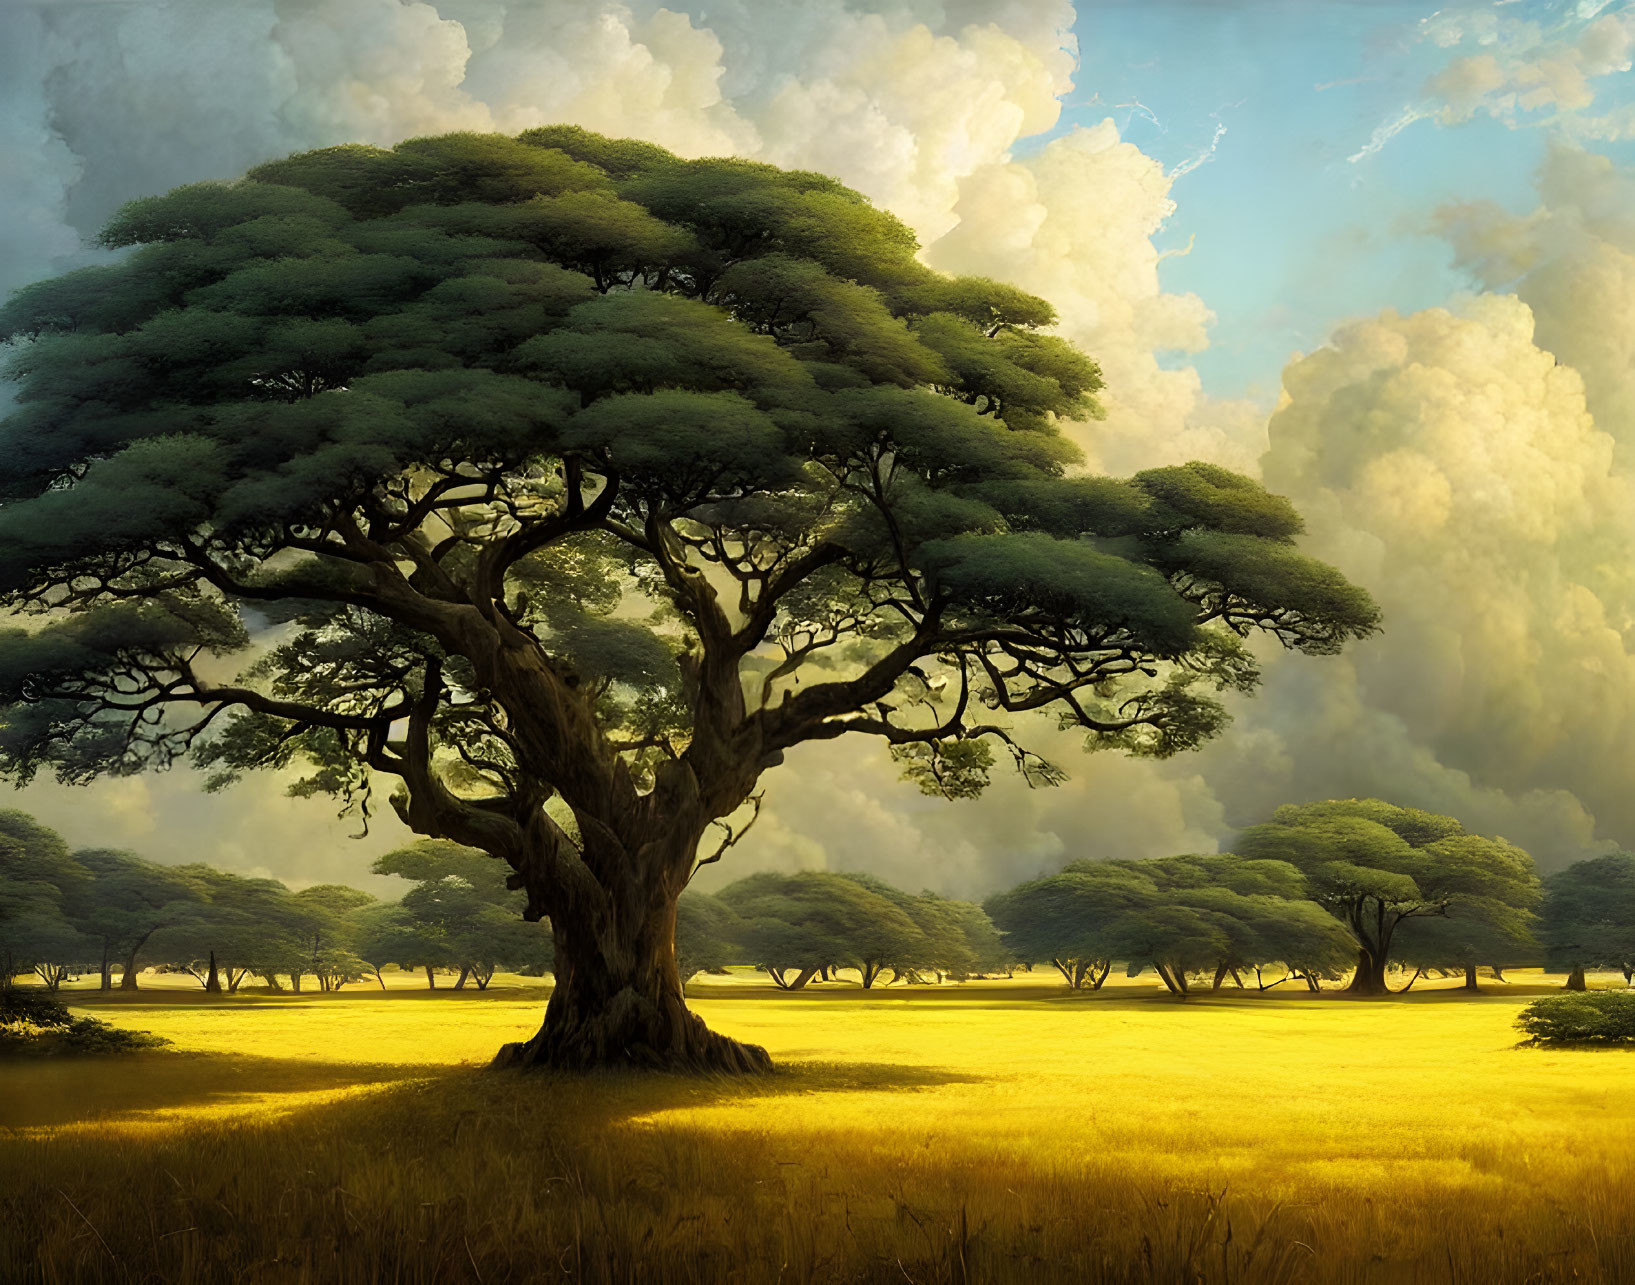 Majestic tree with wide canopy in sunlit savannah landscape